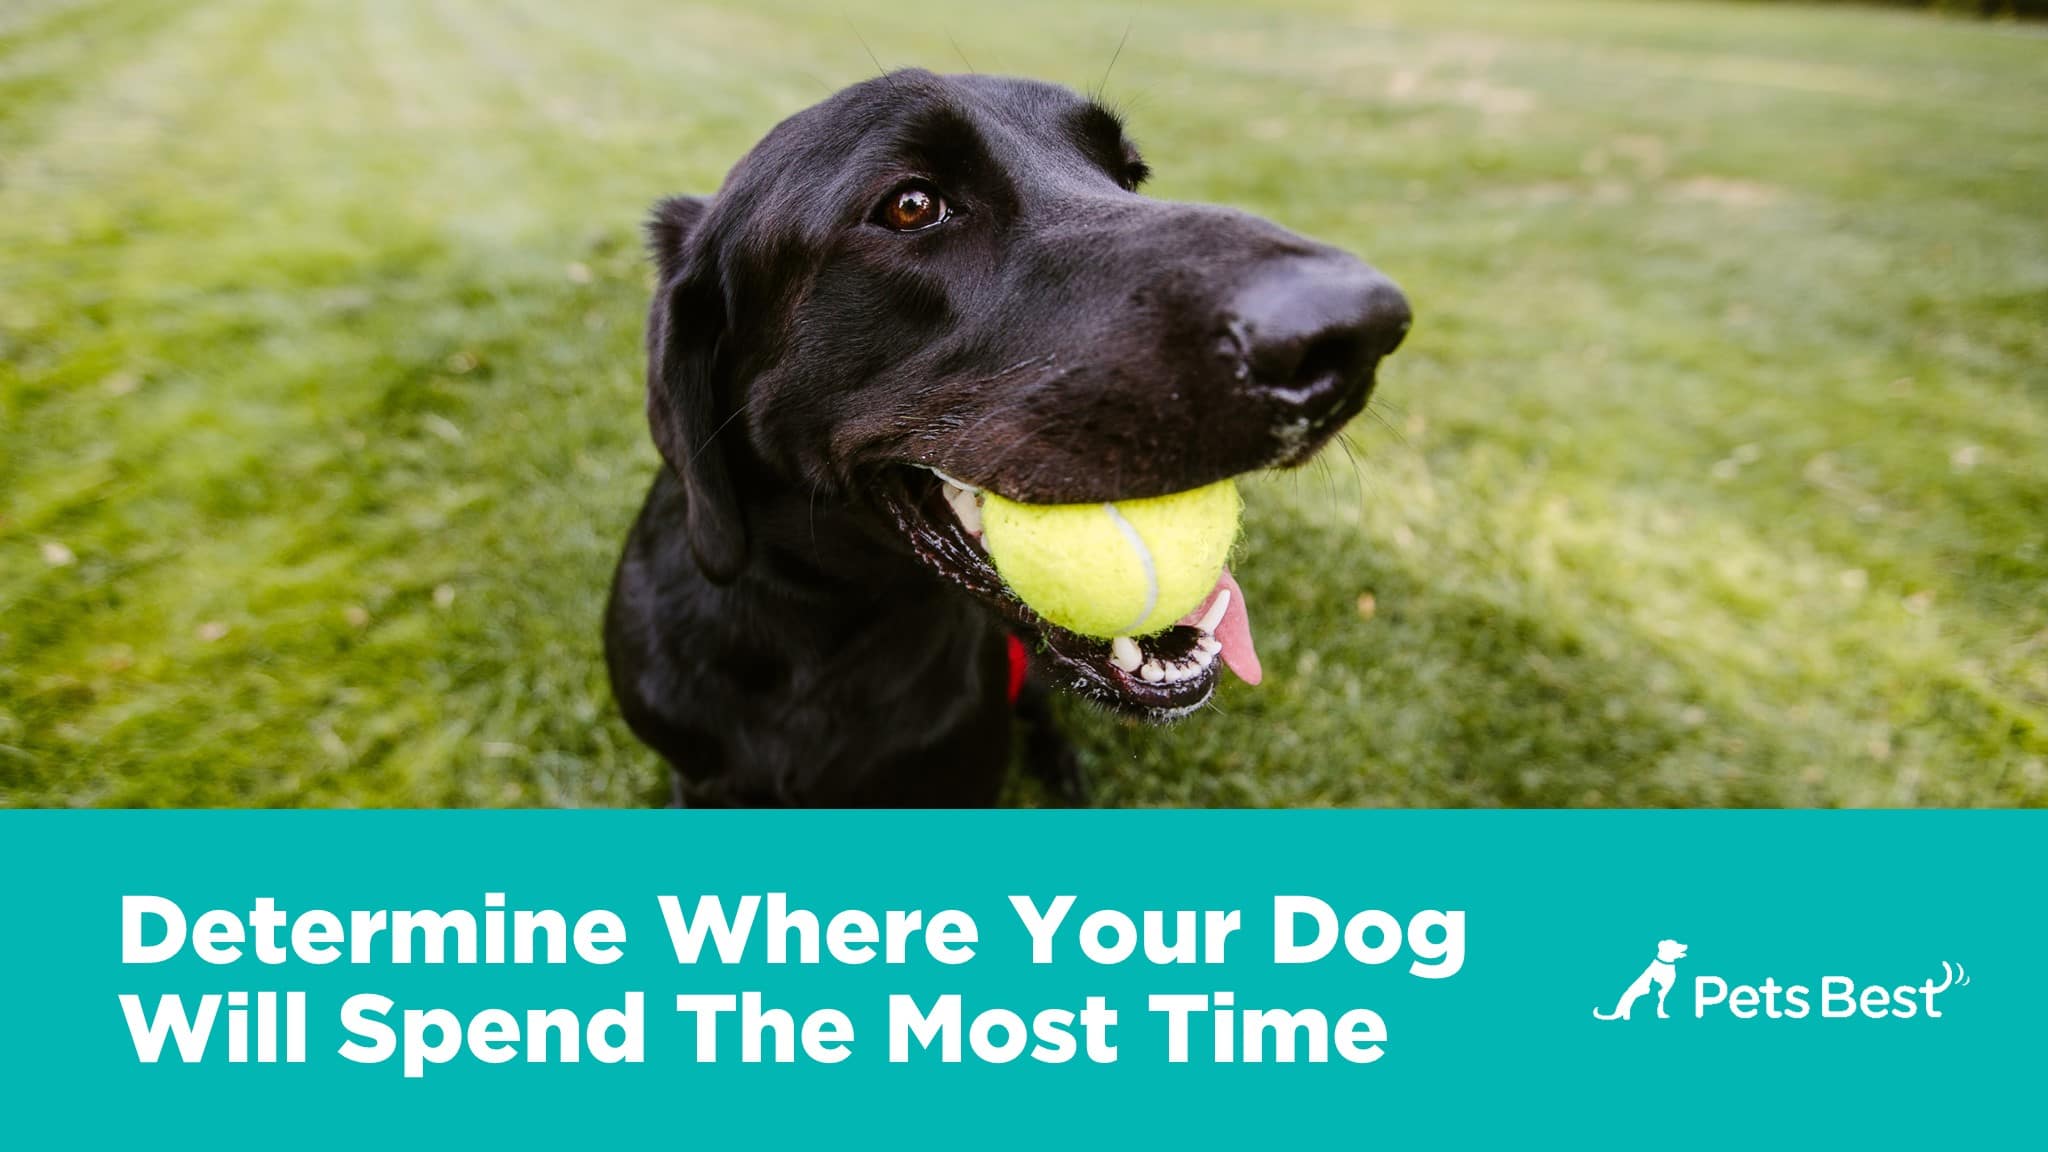 New Dog Owner's Guide| Pets Best tips for bringing your new dog home